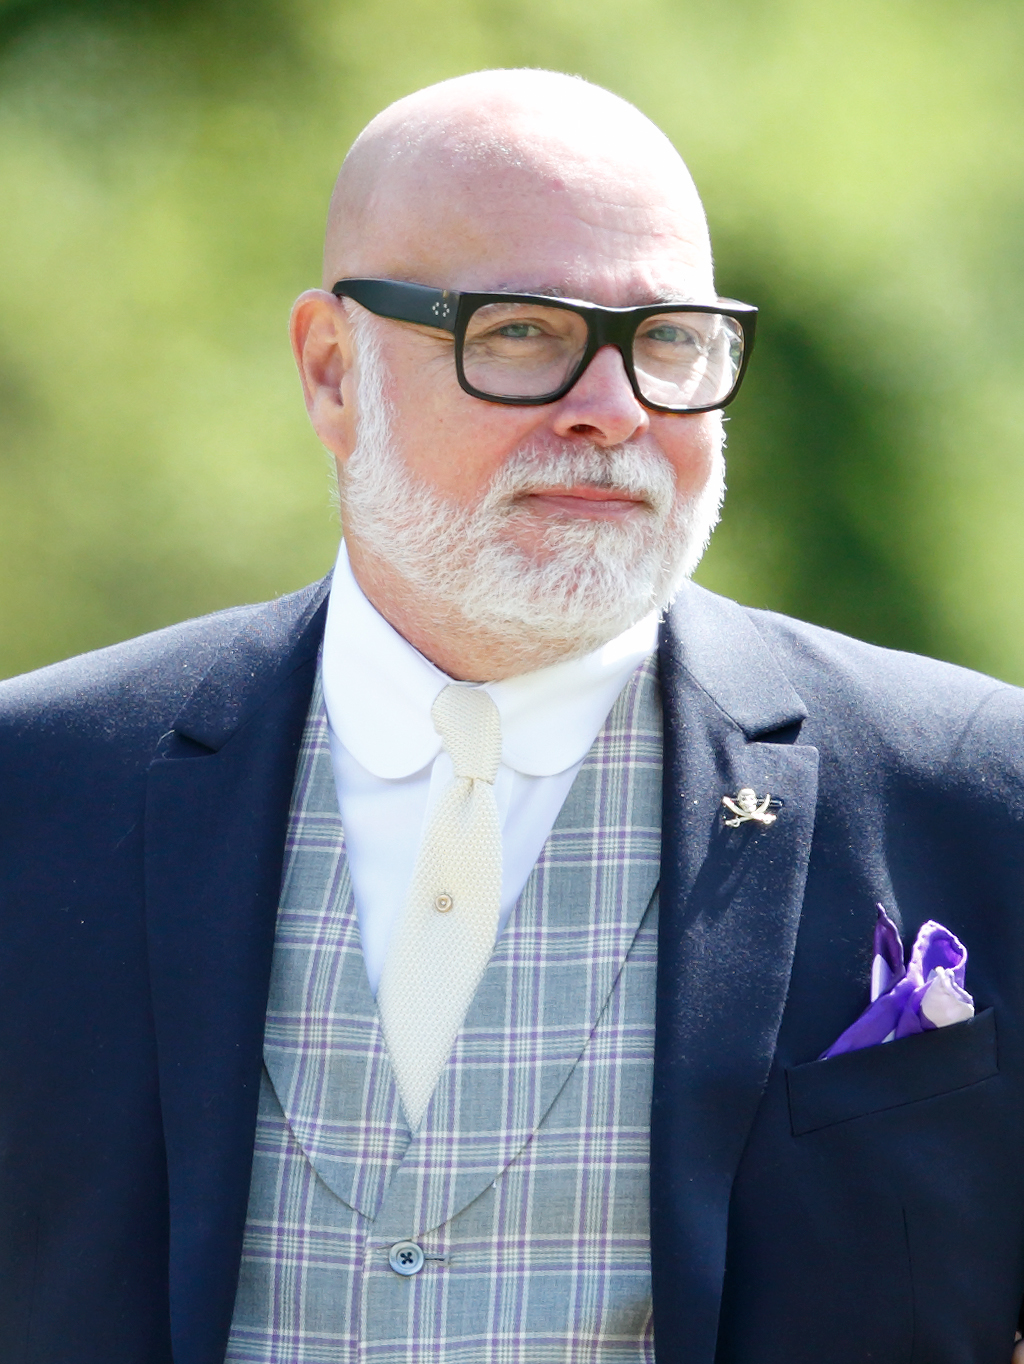 Gary Goldsmith at Pippa Middleton's wedding in Englefield Green in 2017 | Source: Getty Images